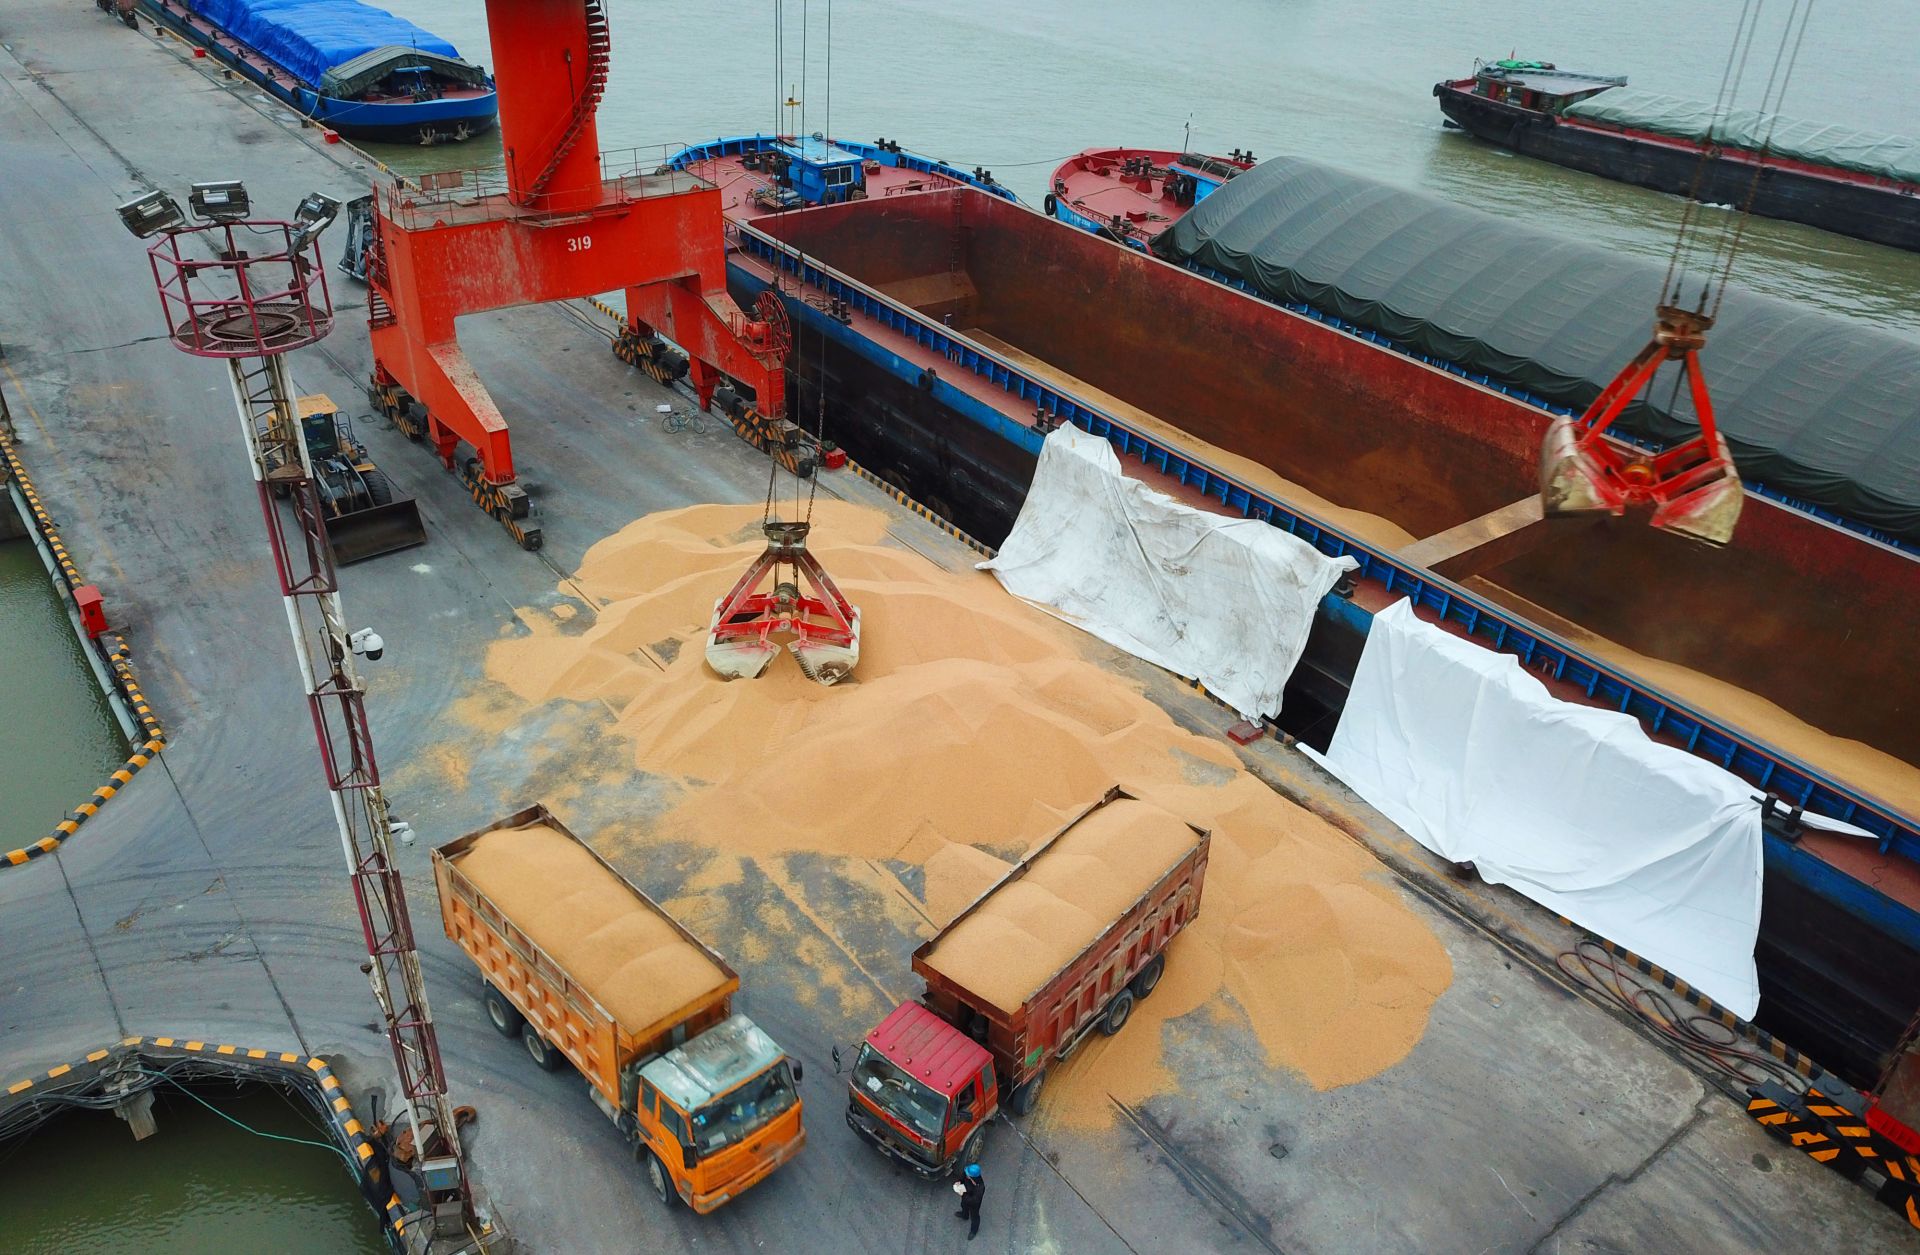 Trucks laden with imported soybeans prepare to depart a port in eastern China in April 2018.